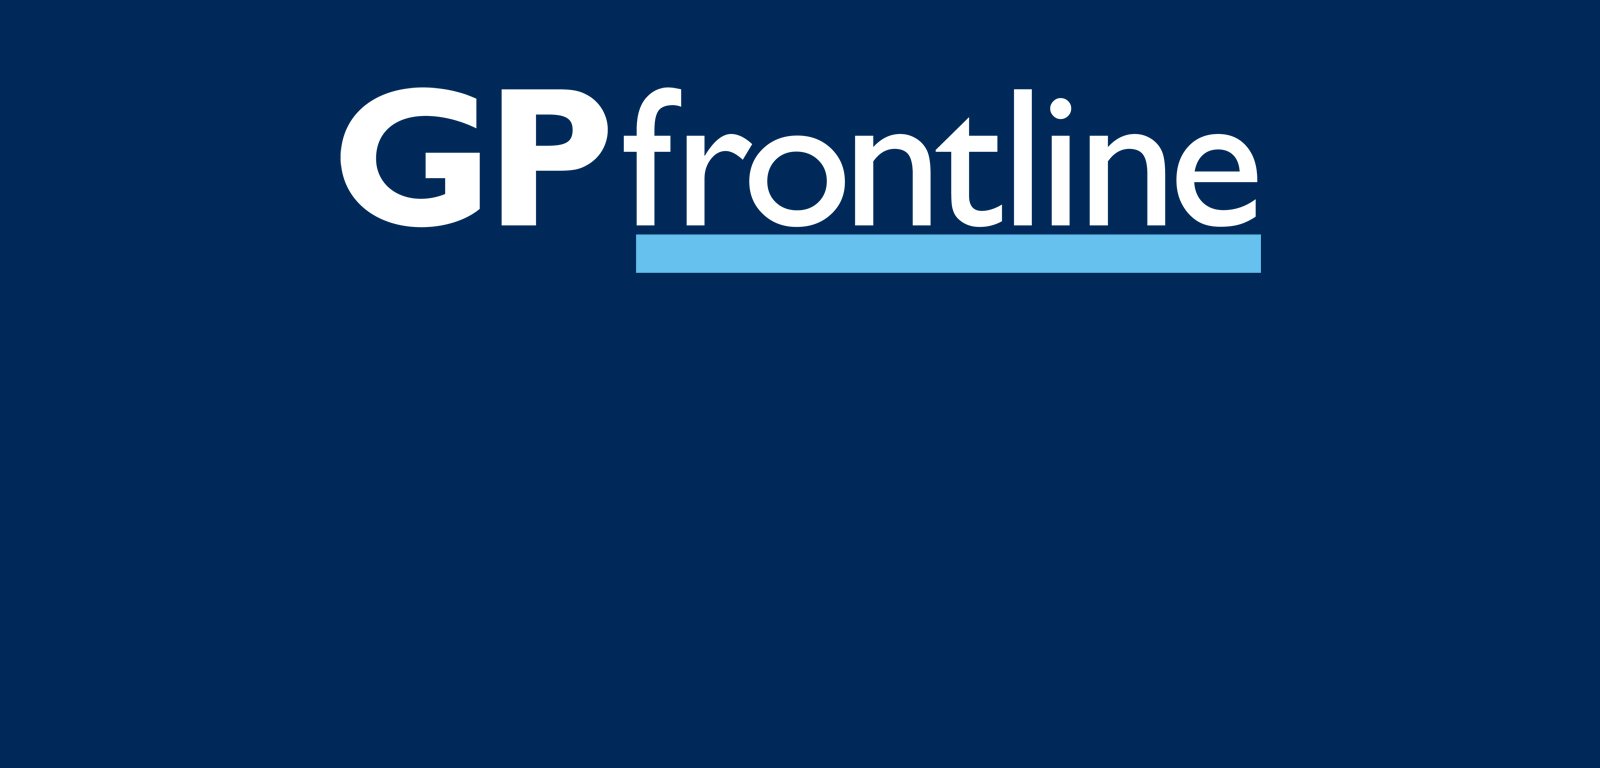 A bold, navy blue cover image with the words GP Frontline in white.  